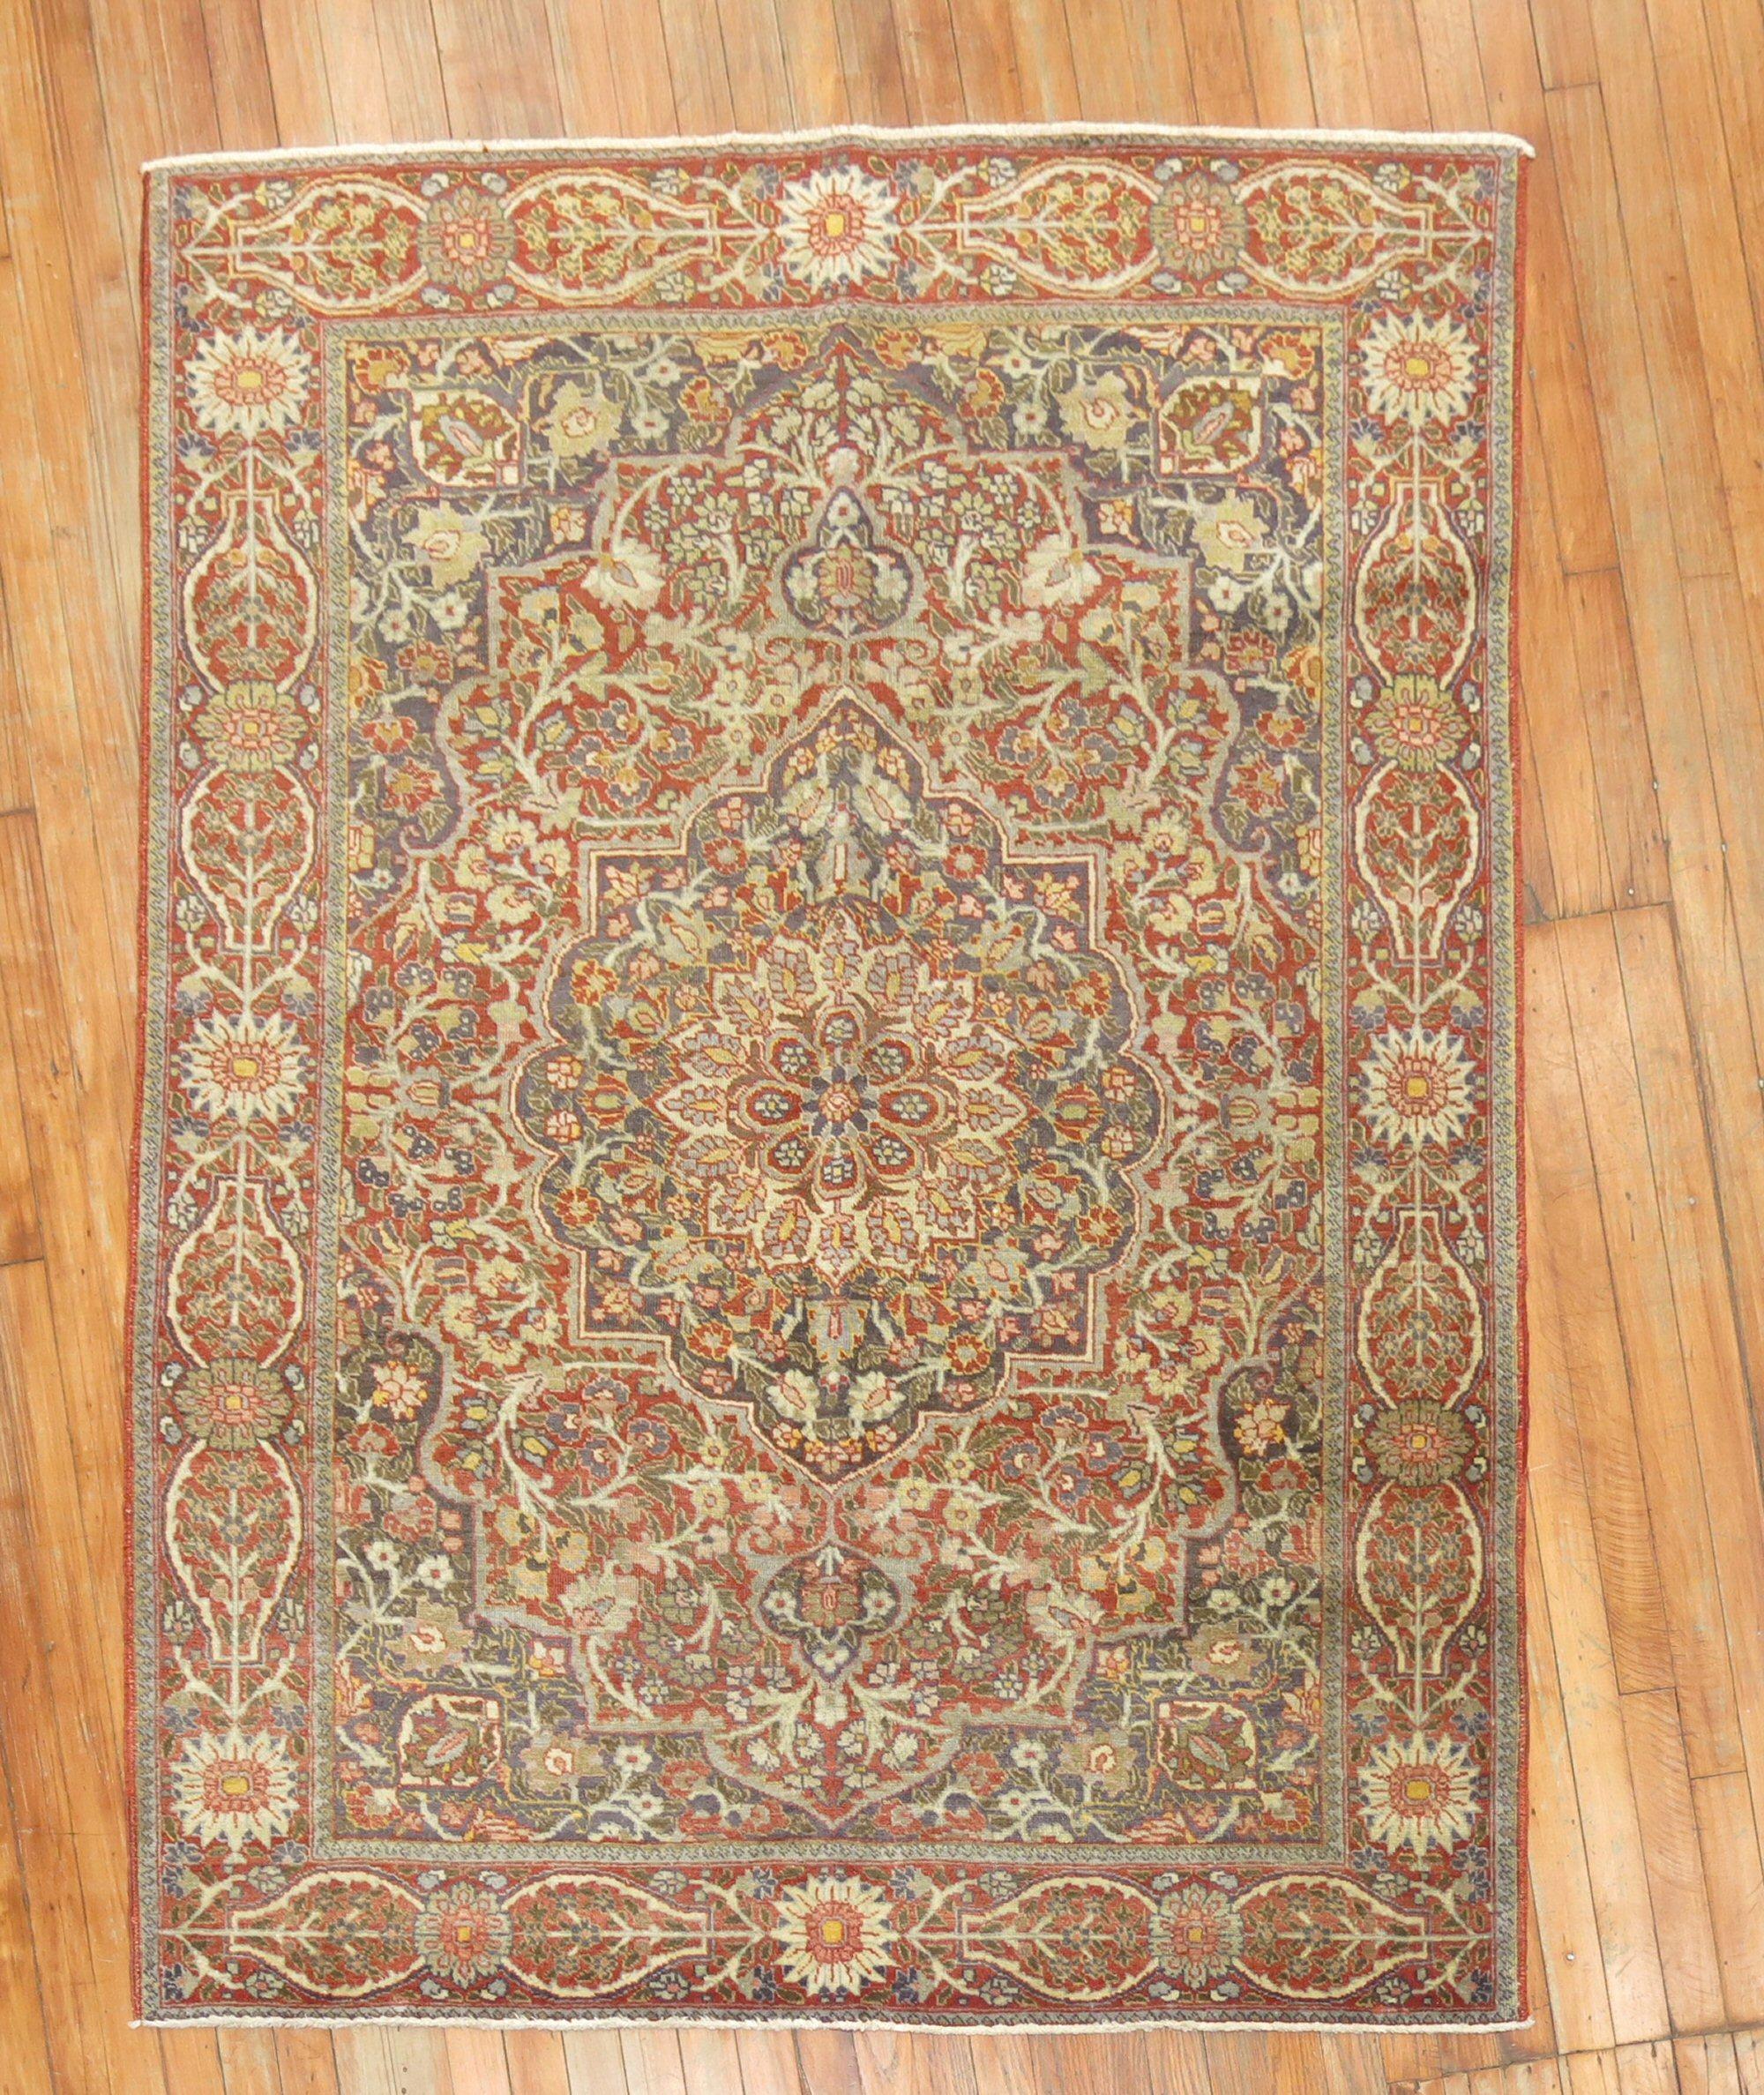 1st quarter of the 20th century Persian Tabriz rug with a traditional medallion and border design in autumn colors

Measures: 4'7'' x 6'.